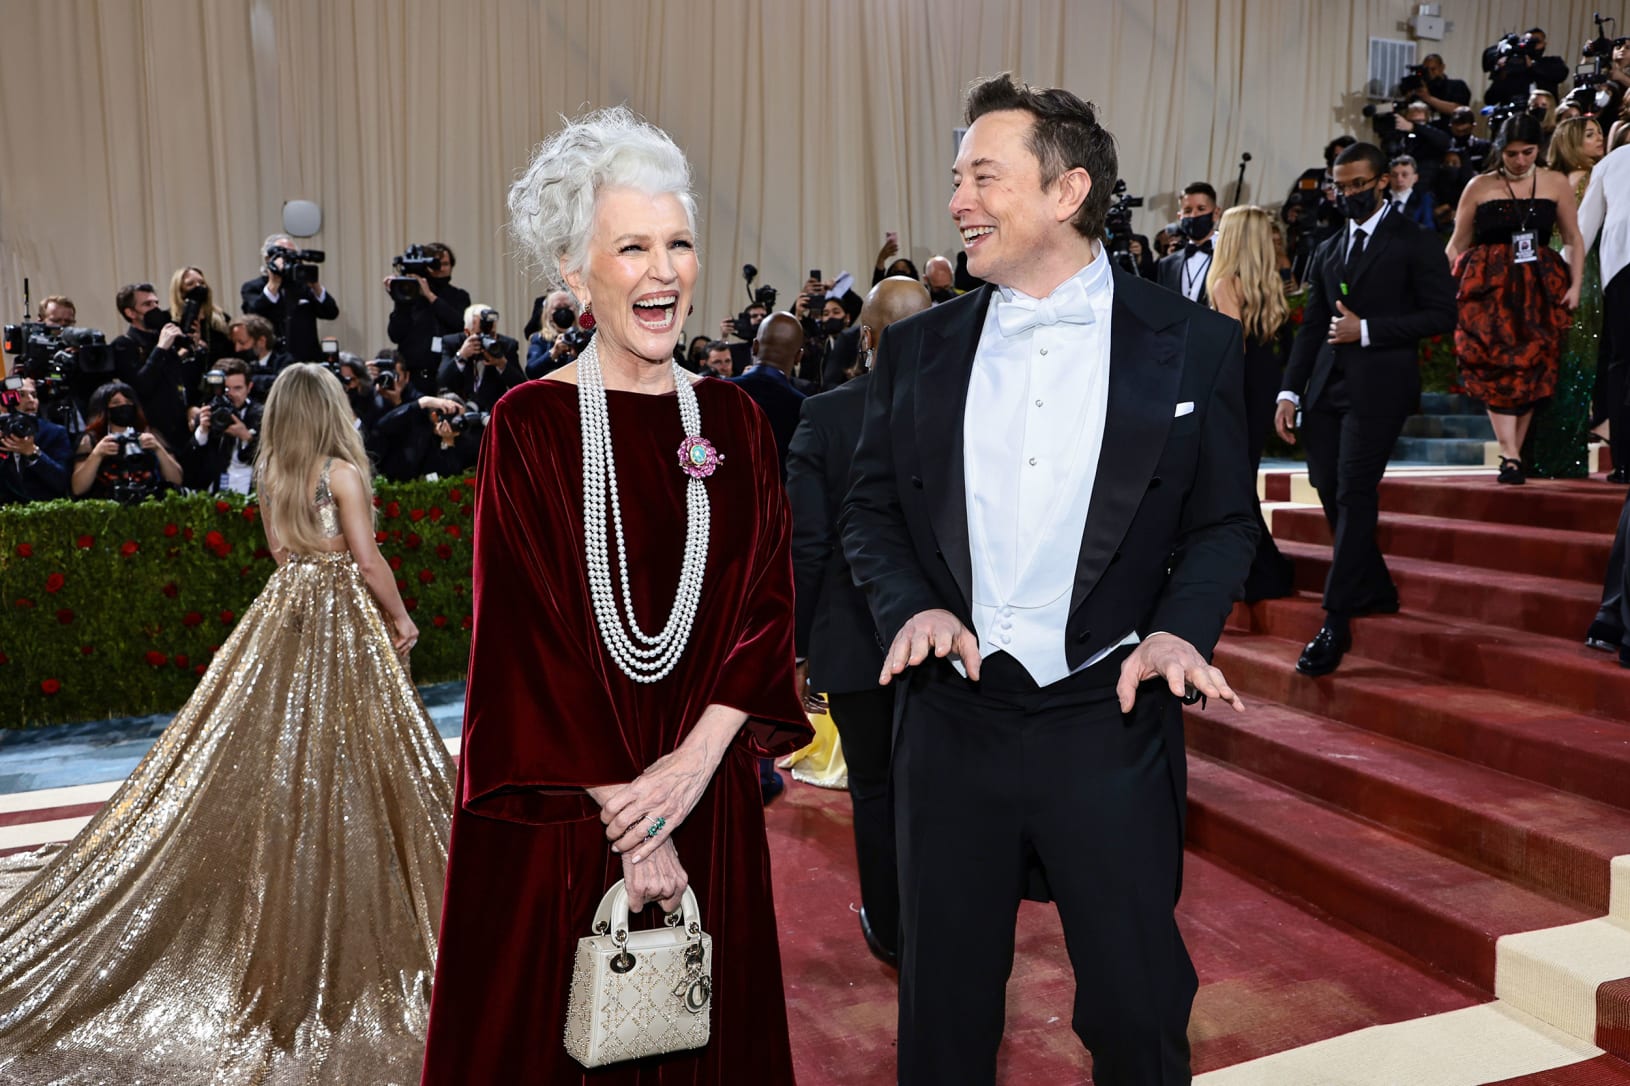 Elon Musk arrived in Tom Ford with his mother, the model Maye Musk,  who was wearing Dior.